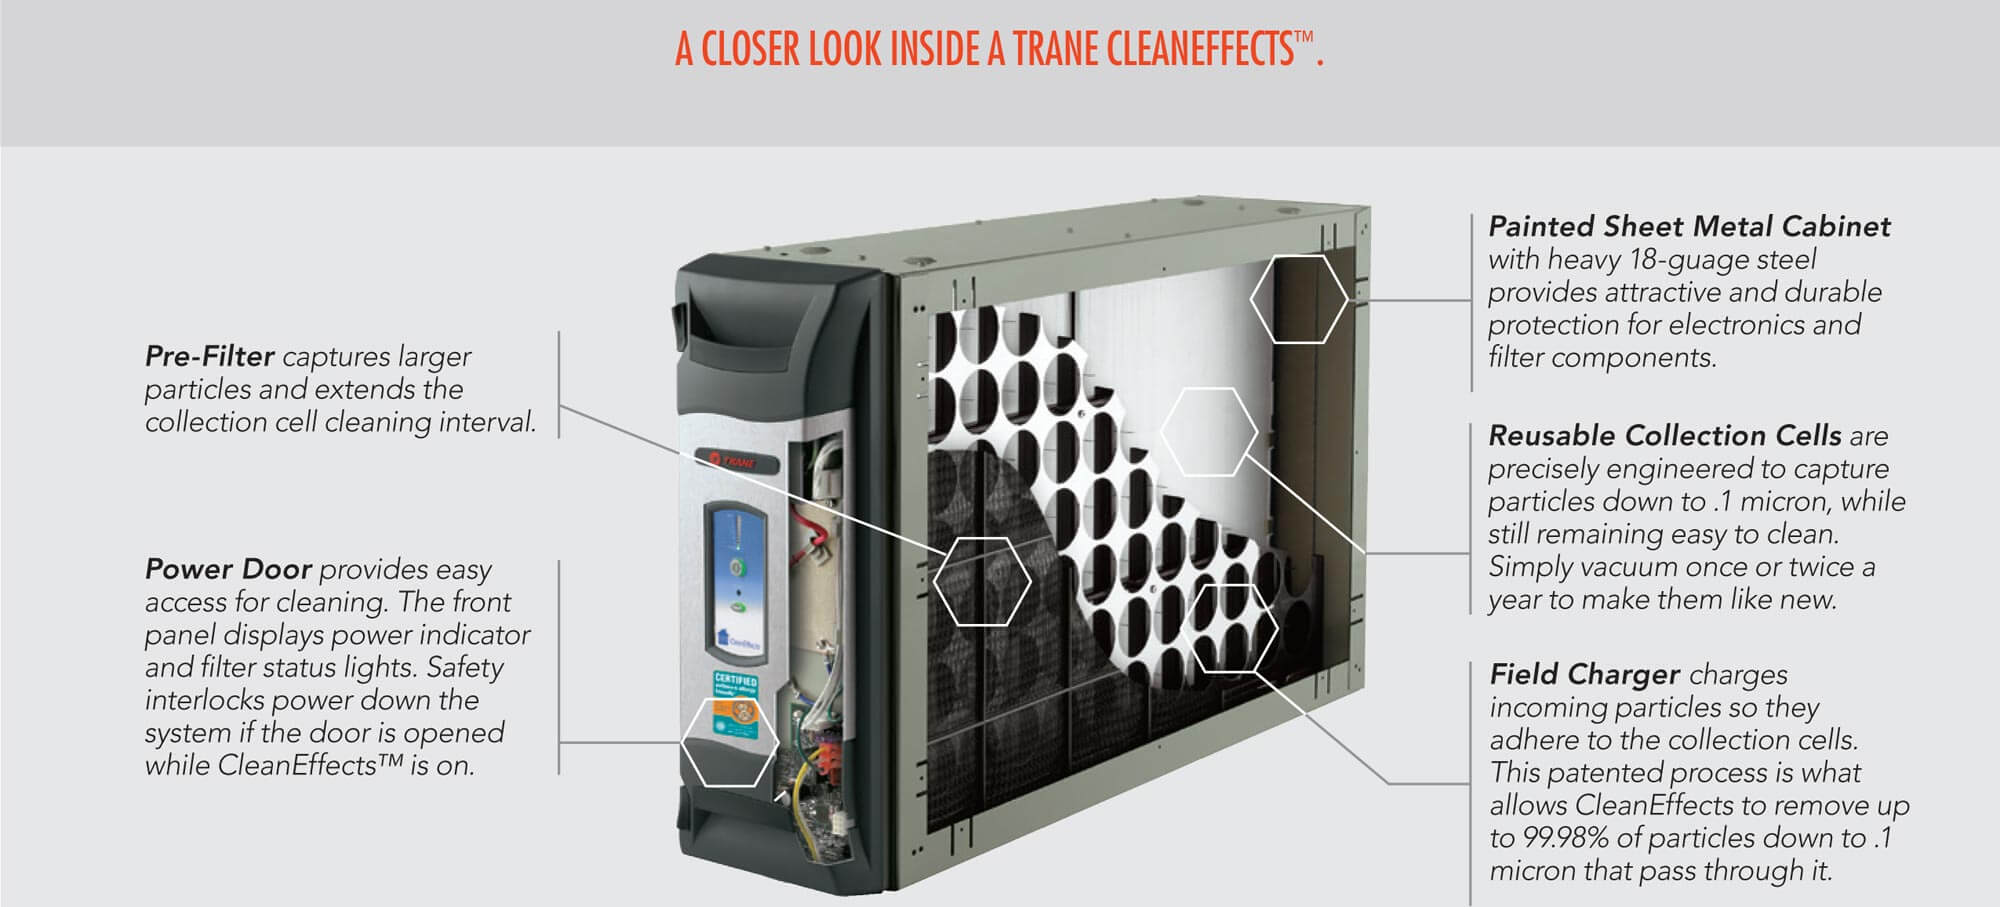 Trane-CleanEffects | D's Enterprise Air Conditioning & Heating